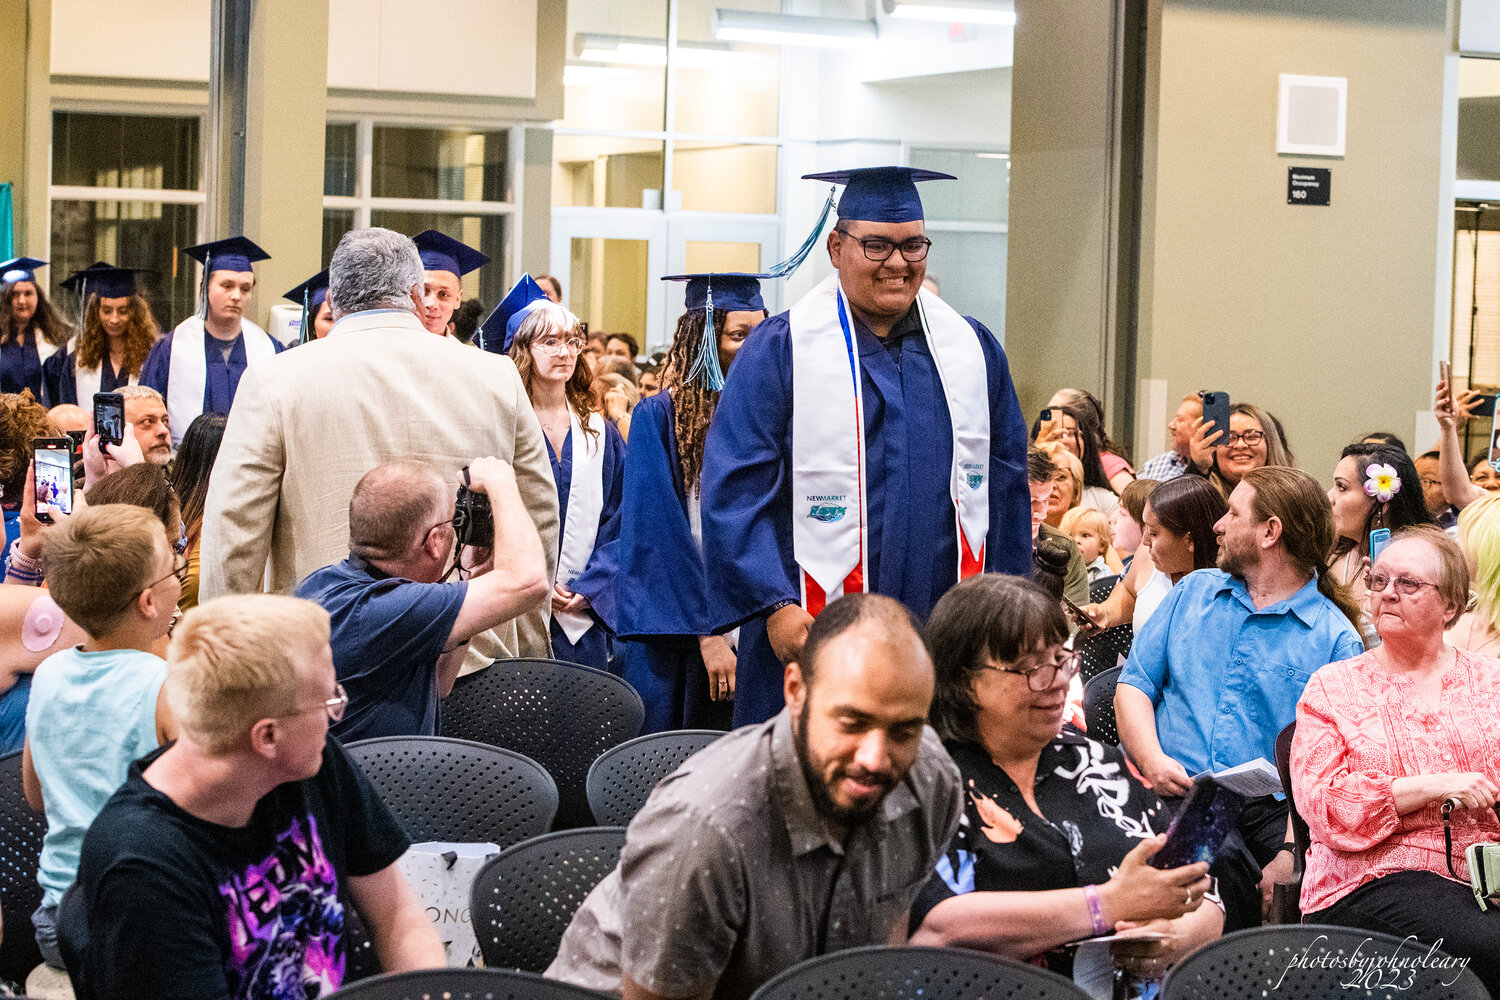 A New Market High School graduate walks the aisle to his diploma.